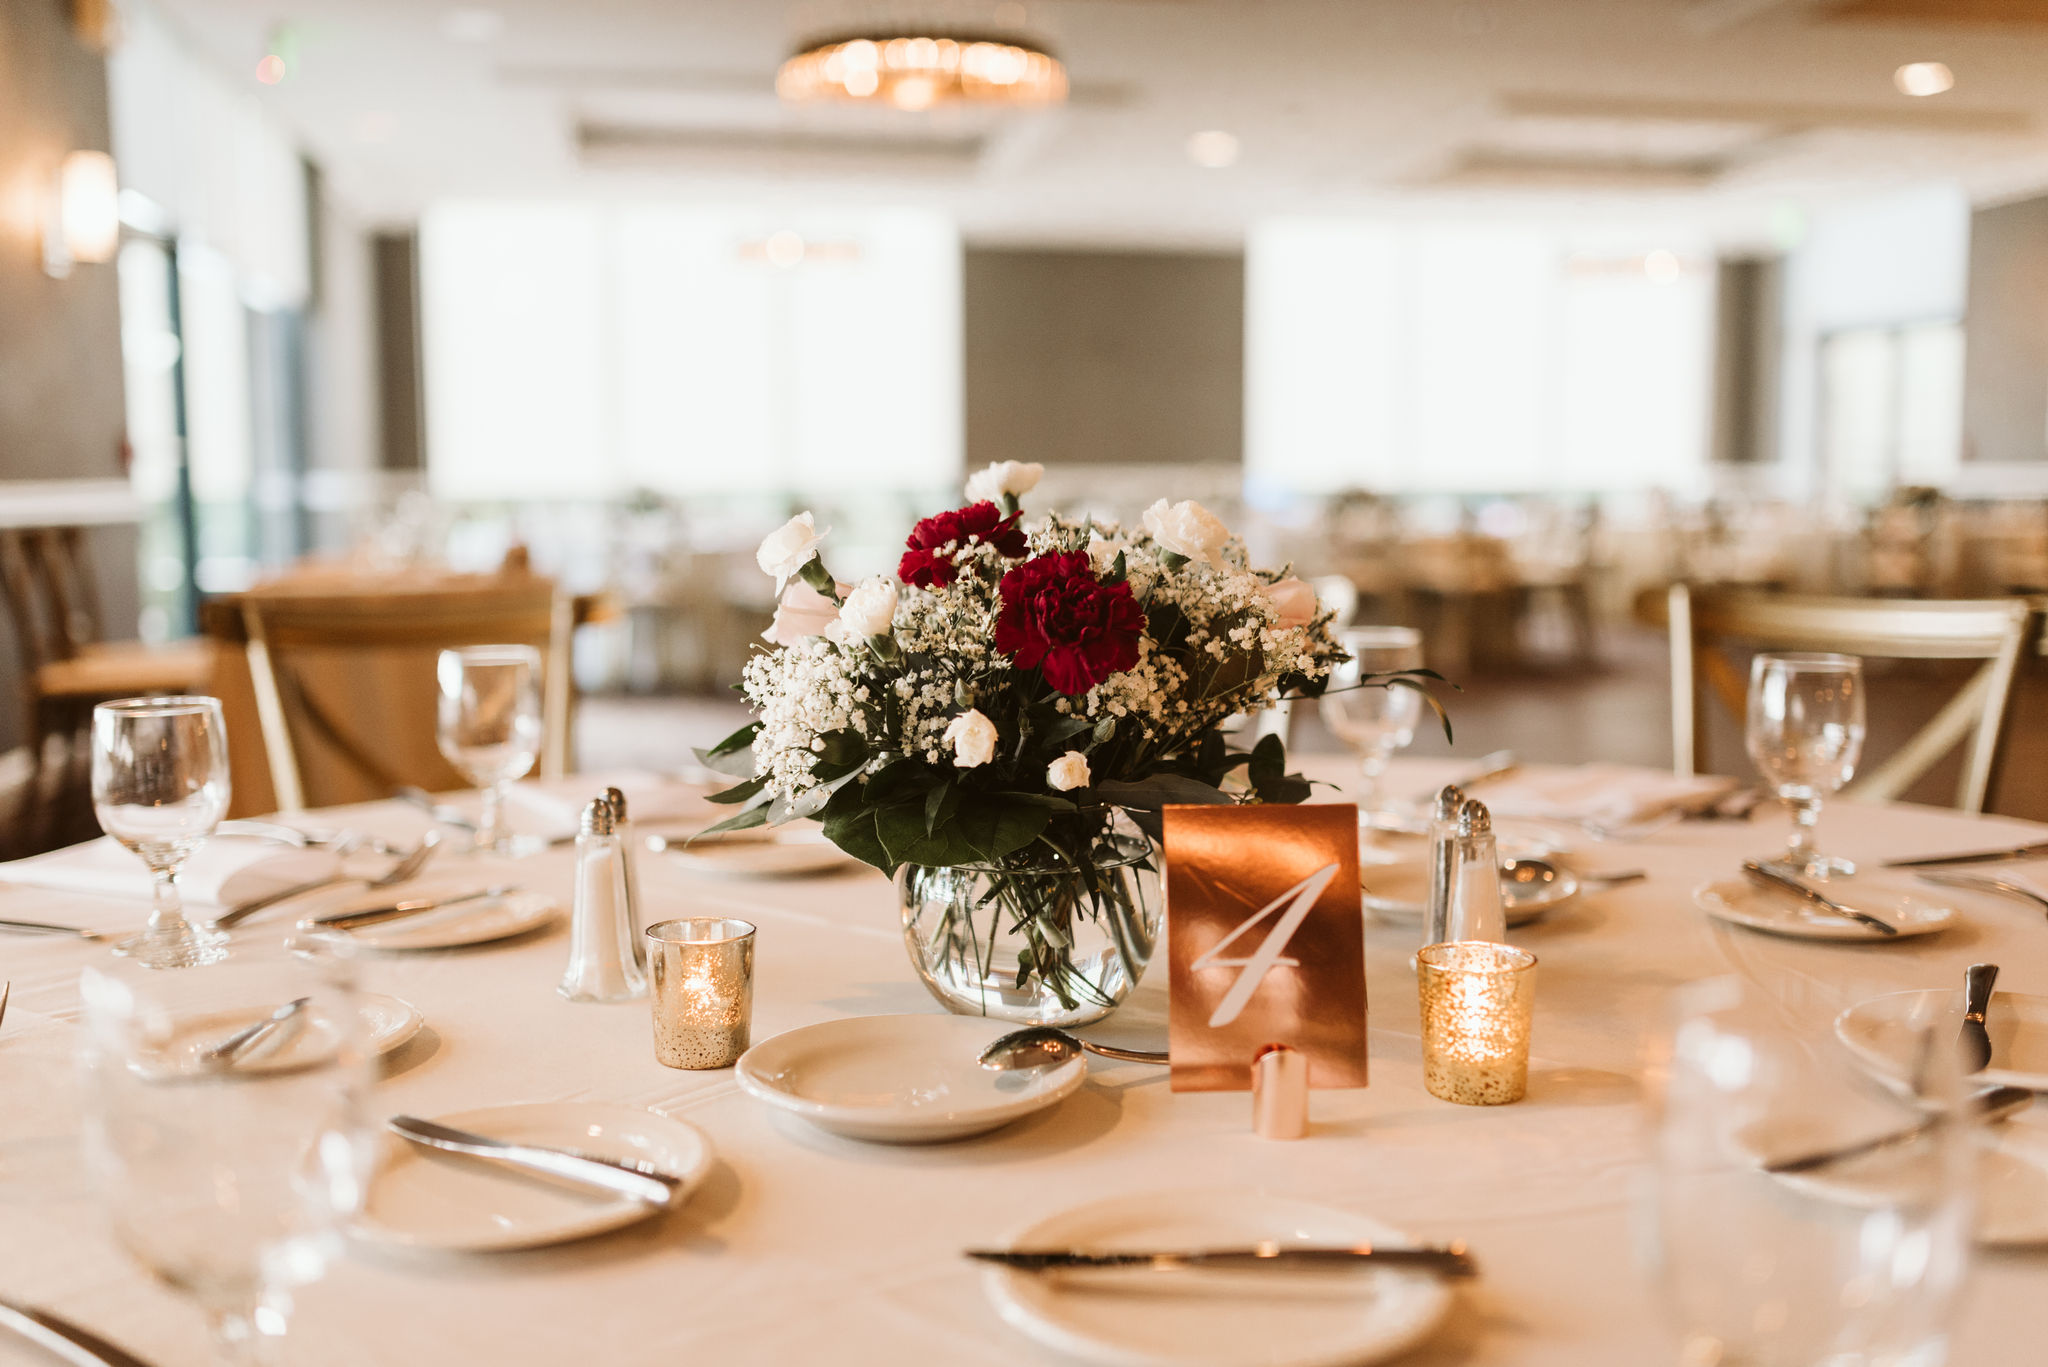  Phoenix Maryland, Baltimore Wedding Photographer, Eagle’s Nest Country Club, Classic, Romantic, Reception Table Setting, Metallic Table Number, Dundalk Florist 